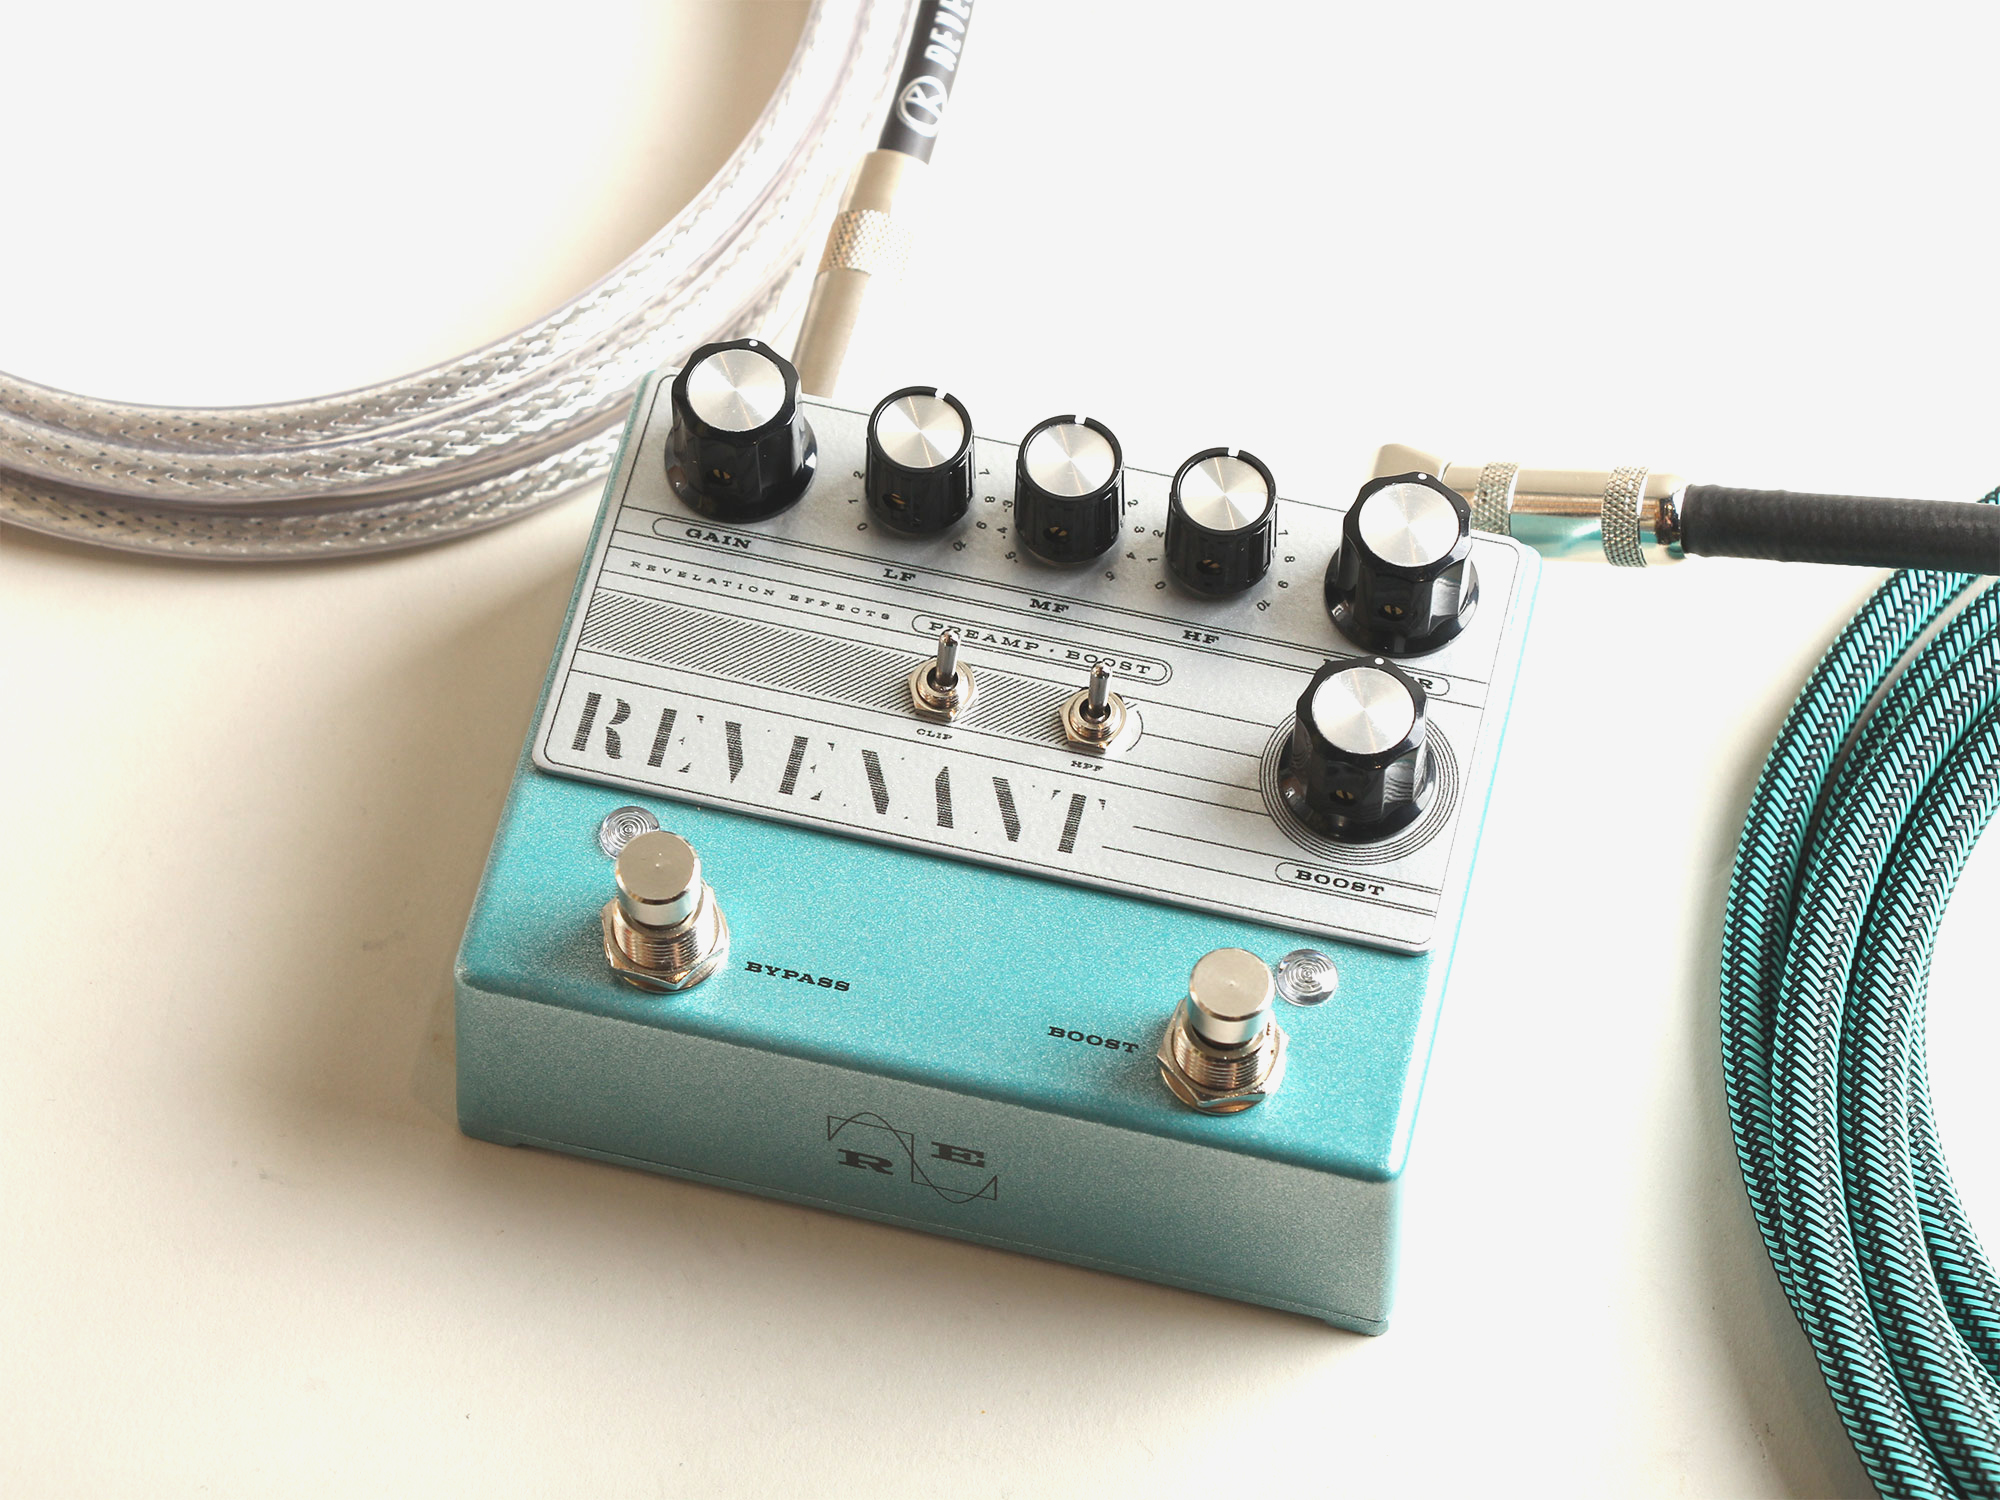 Revelation Effects REVENANT Preamp-Boost V1.2 -Teal Sparkle with Silver face plate- (Limited) レベレーションエフェクト SM2024EF サブ画像8